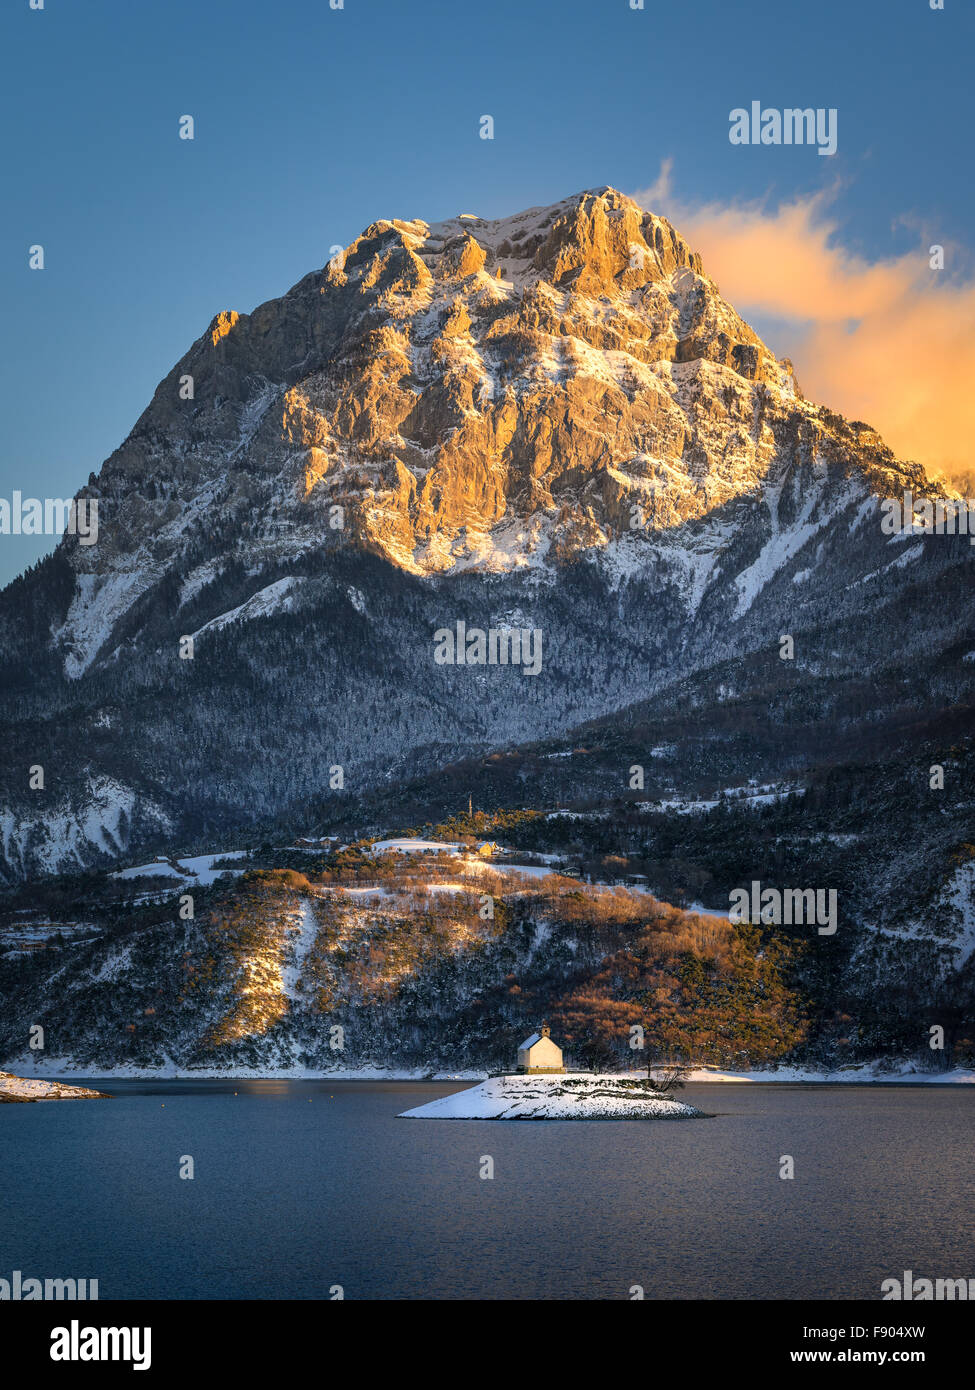 Winter sunset view of the Grand Morgon mountain rising above the Saint Michel Bay of Serre Poncon lake, Southern Alps, France Stock Photo